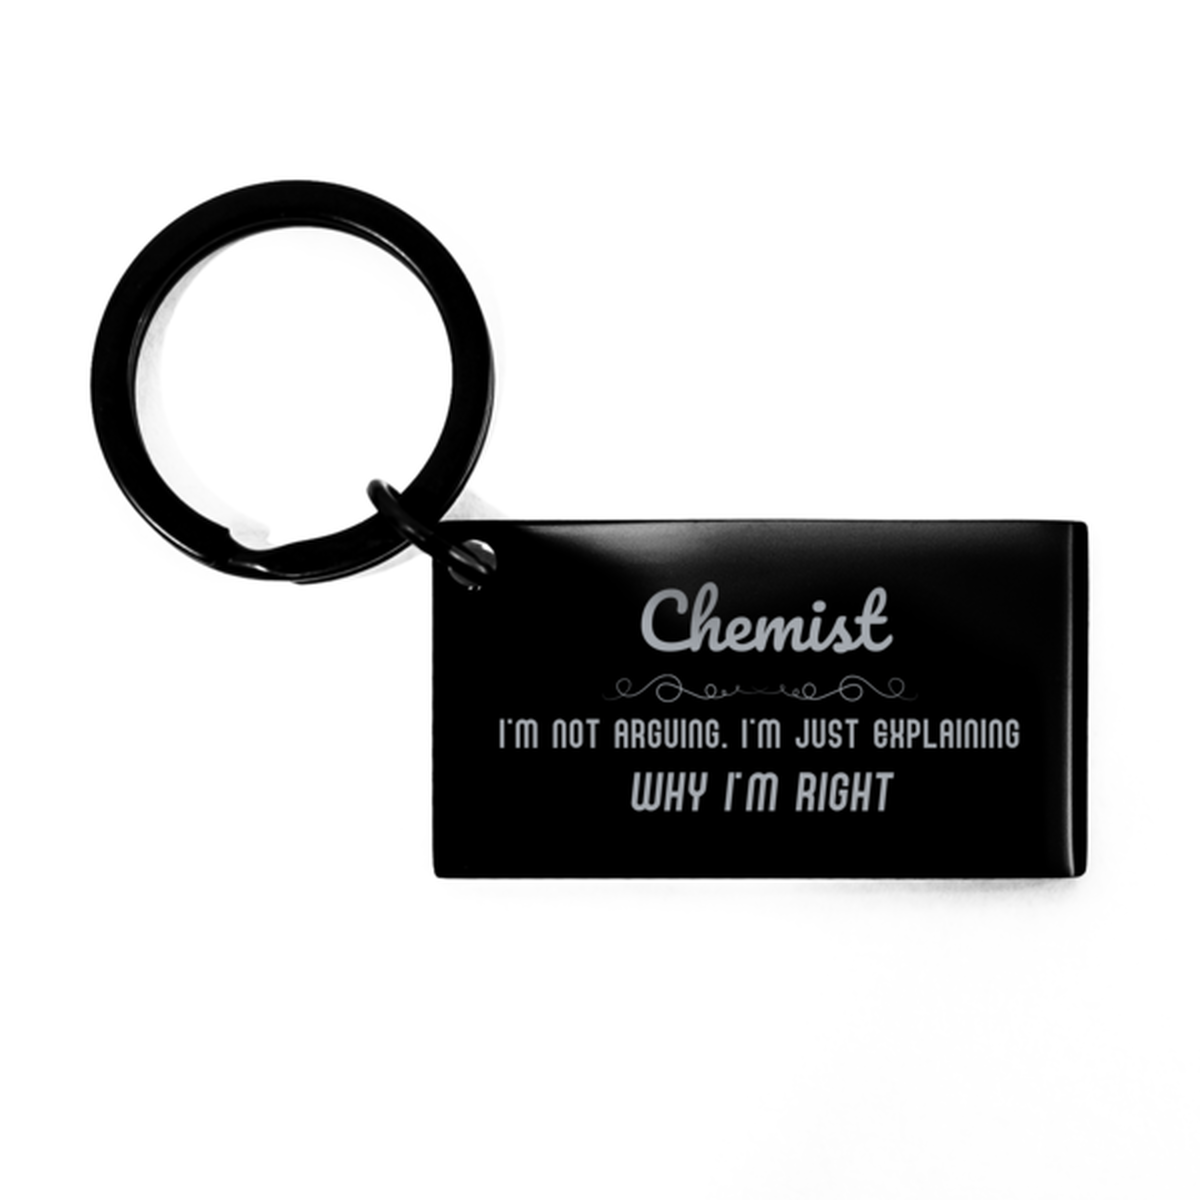 Chemist I'm not Arguing. I'm Just Explaining Why I'm RIGHT Keychain, Funny Saying Quote Chemist Gifts For Chemist Graduation Birthday Christmas Gifts for Men Women Coworker